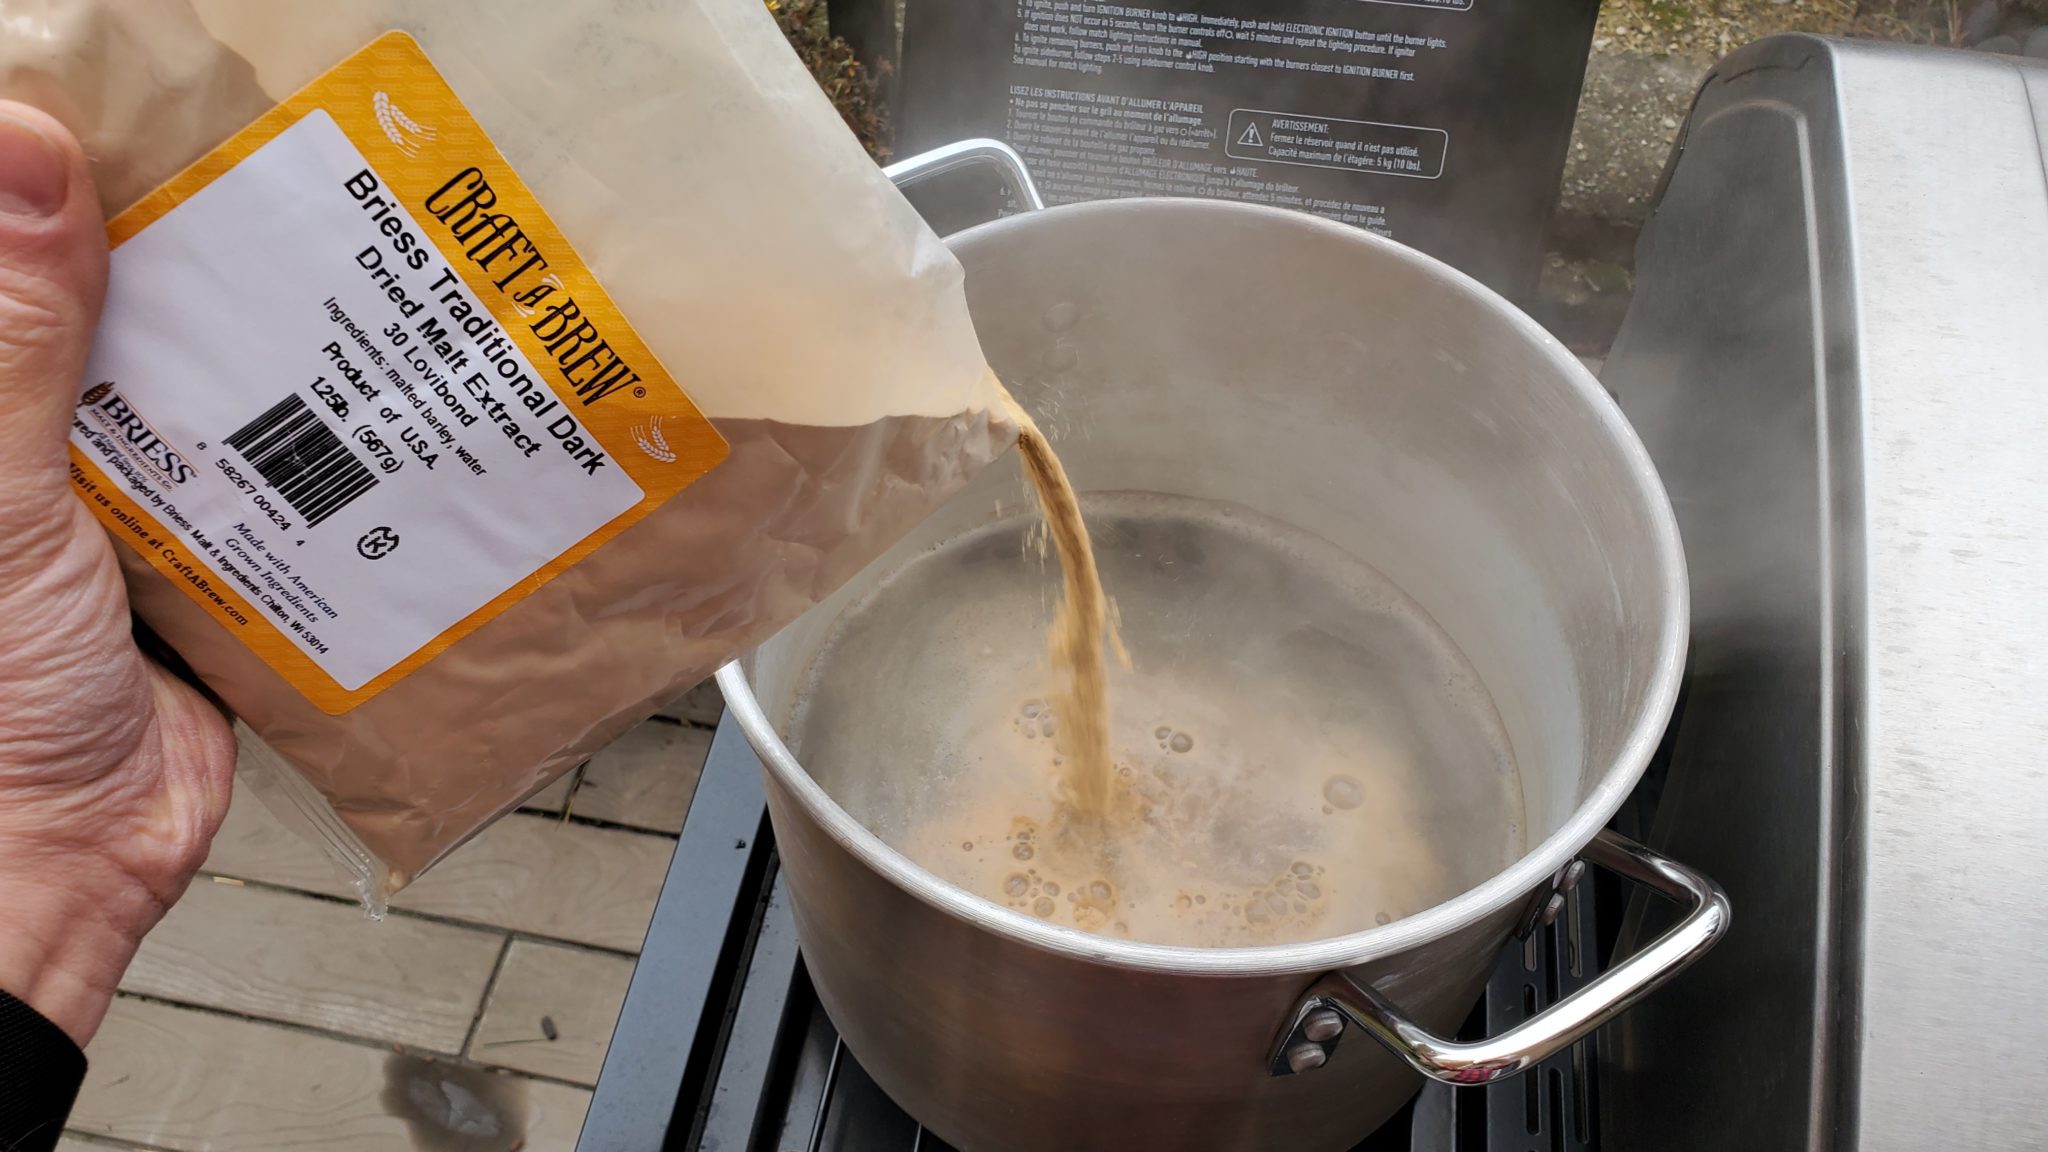 Craft A Brew Home Beer Brewing Kit Review - Thirsty Bastards